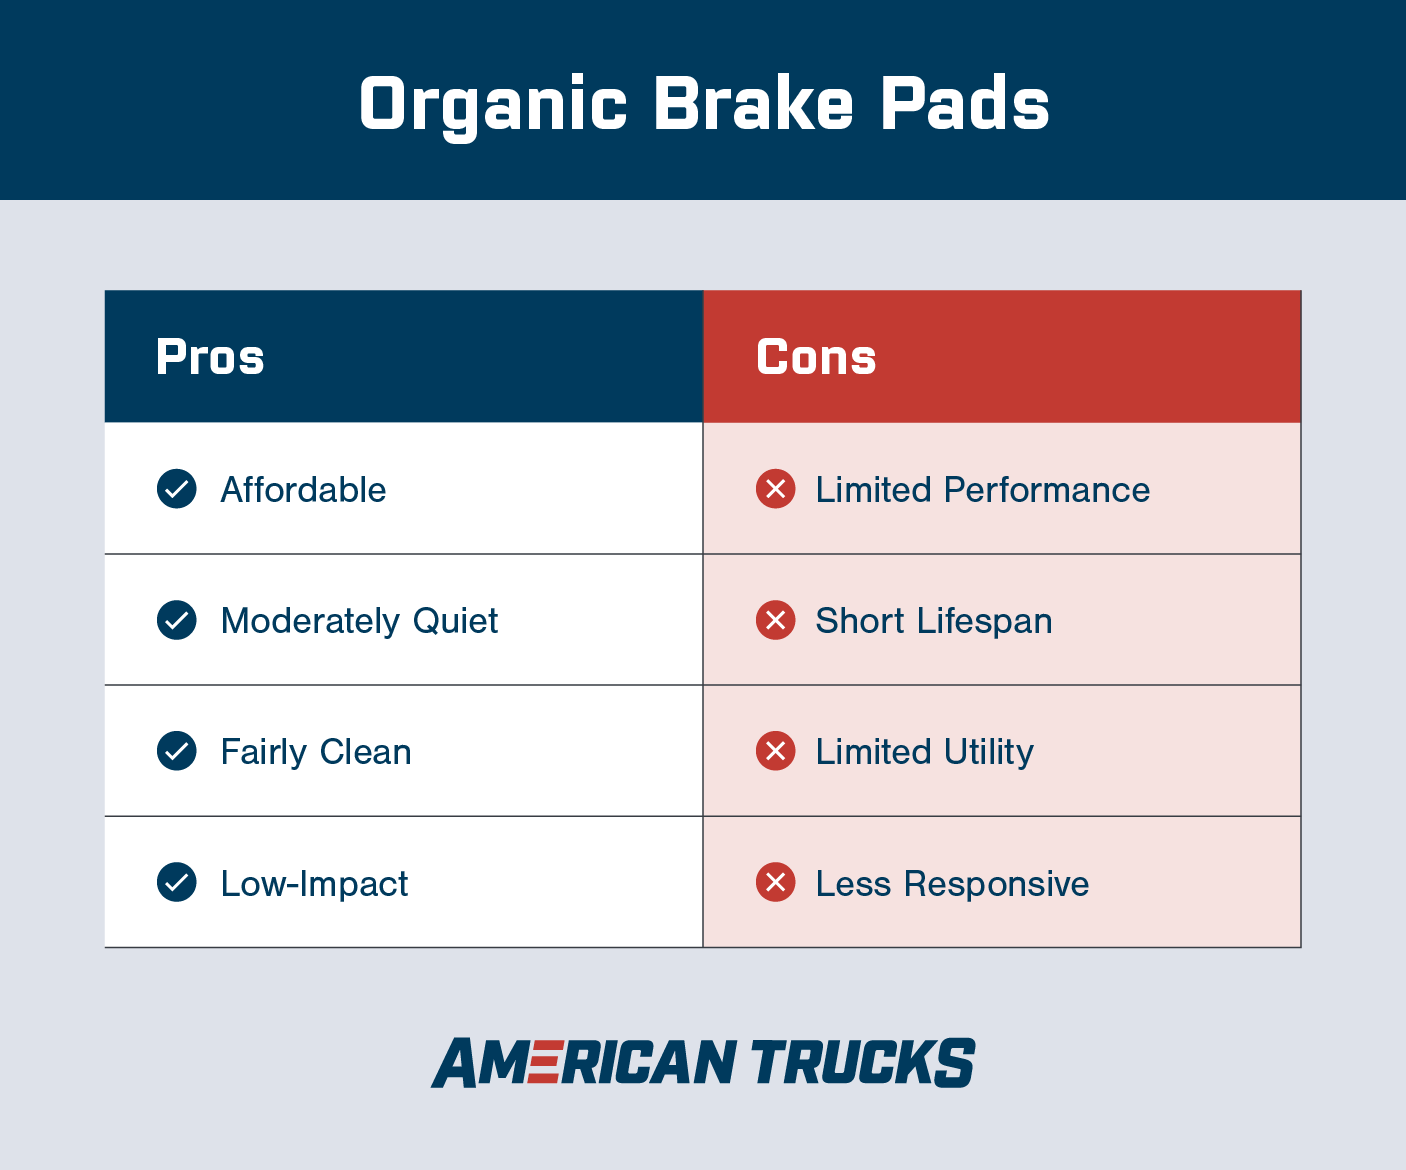 Char breaking down pros and cons of organic brake pads